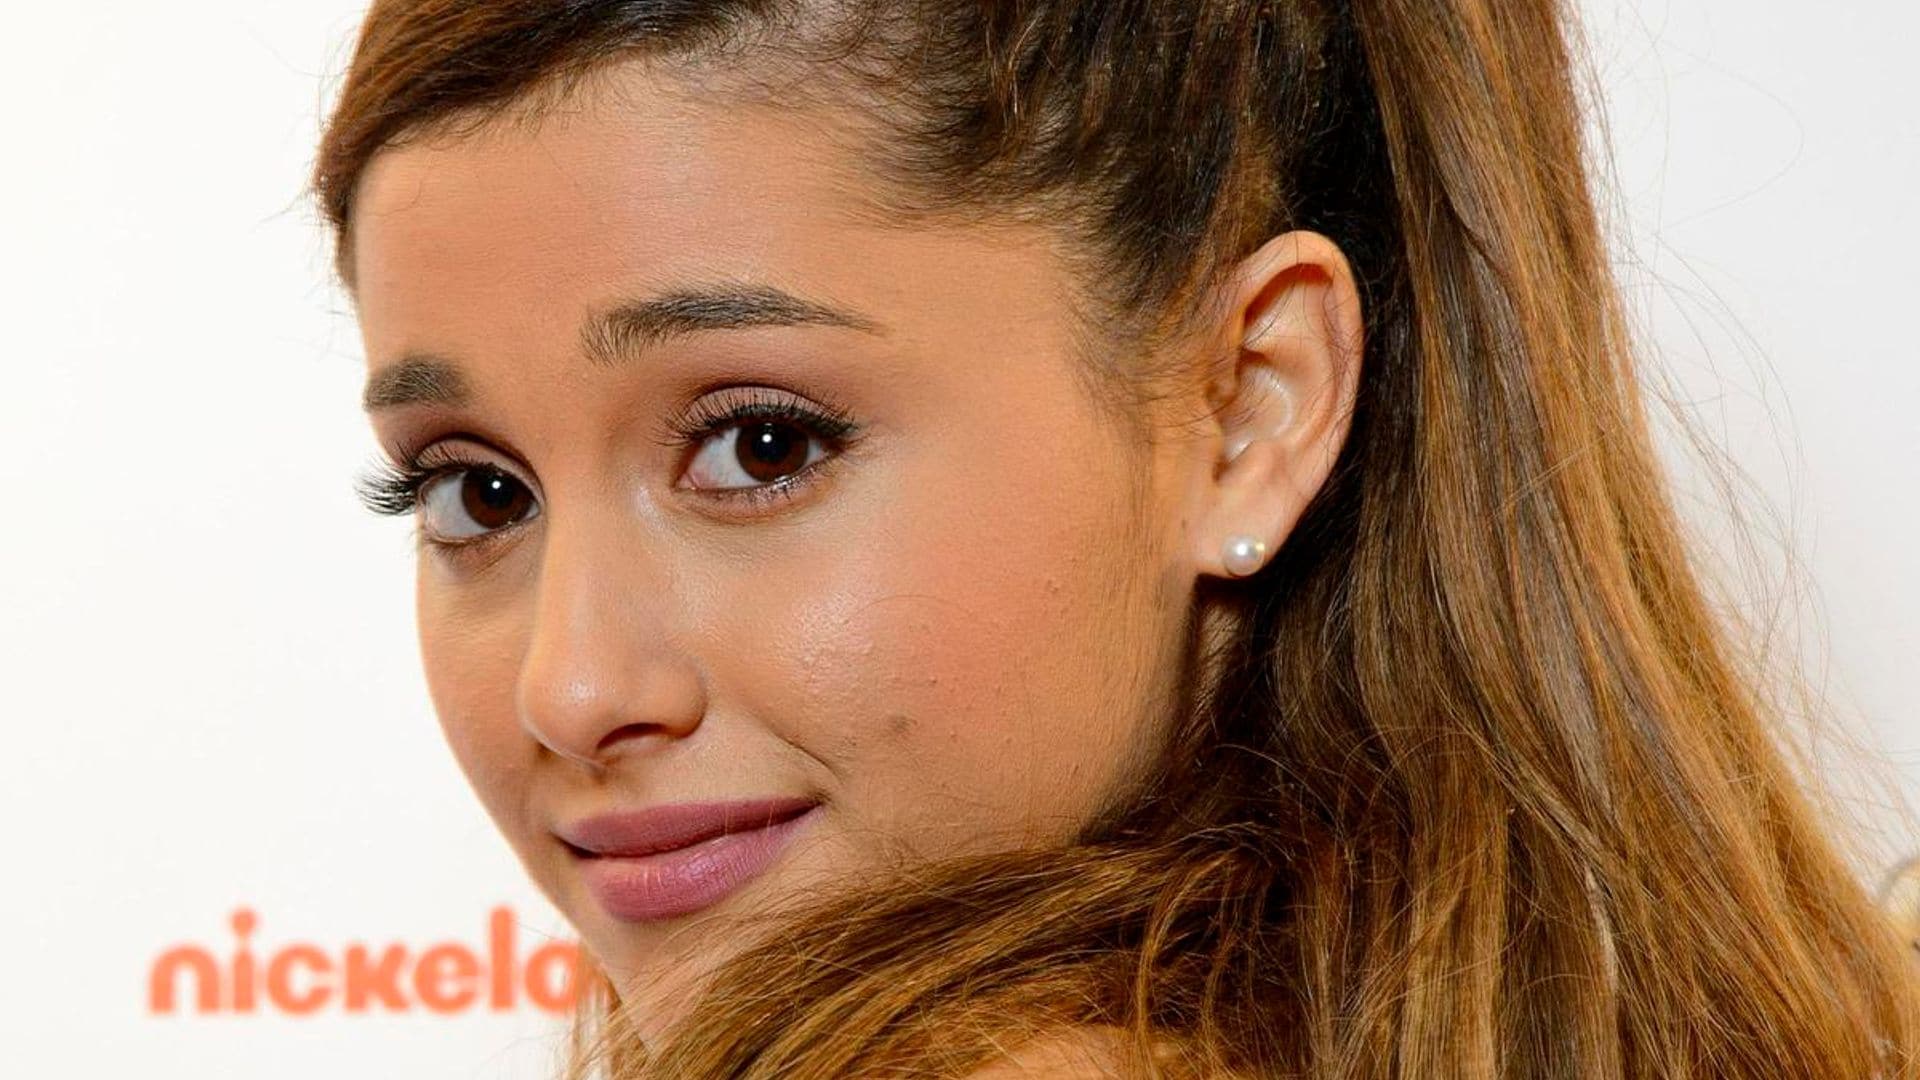 Ariana Grande breaks her silence about Nickelodeon: ‘I guess I’m upset’